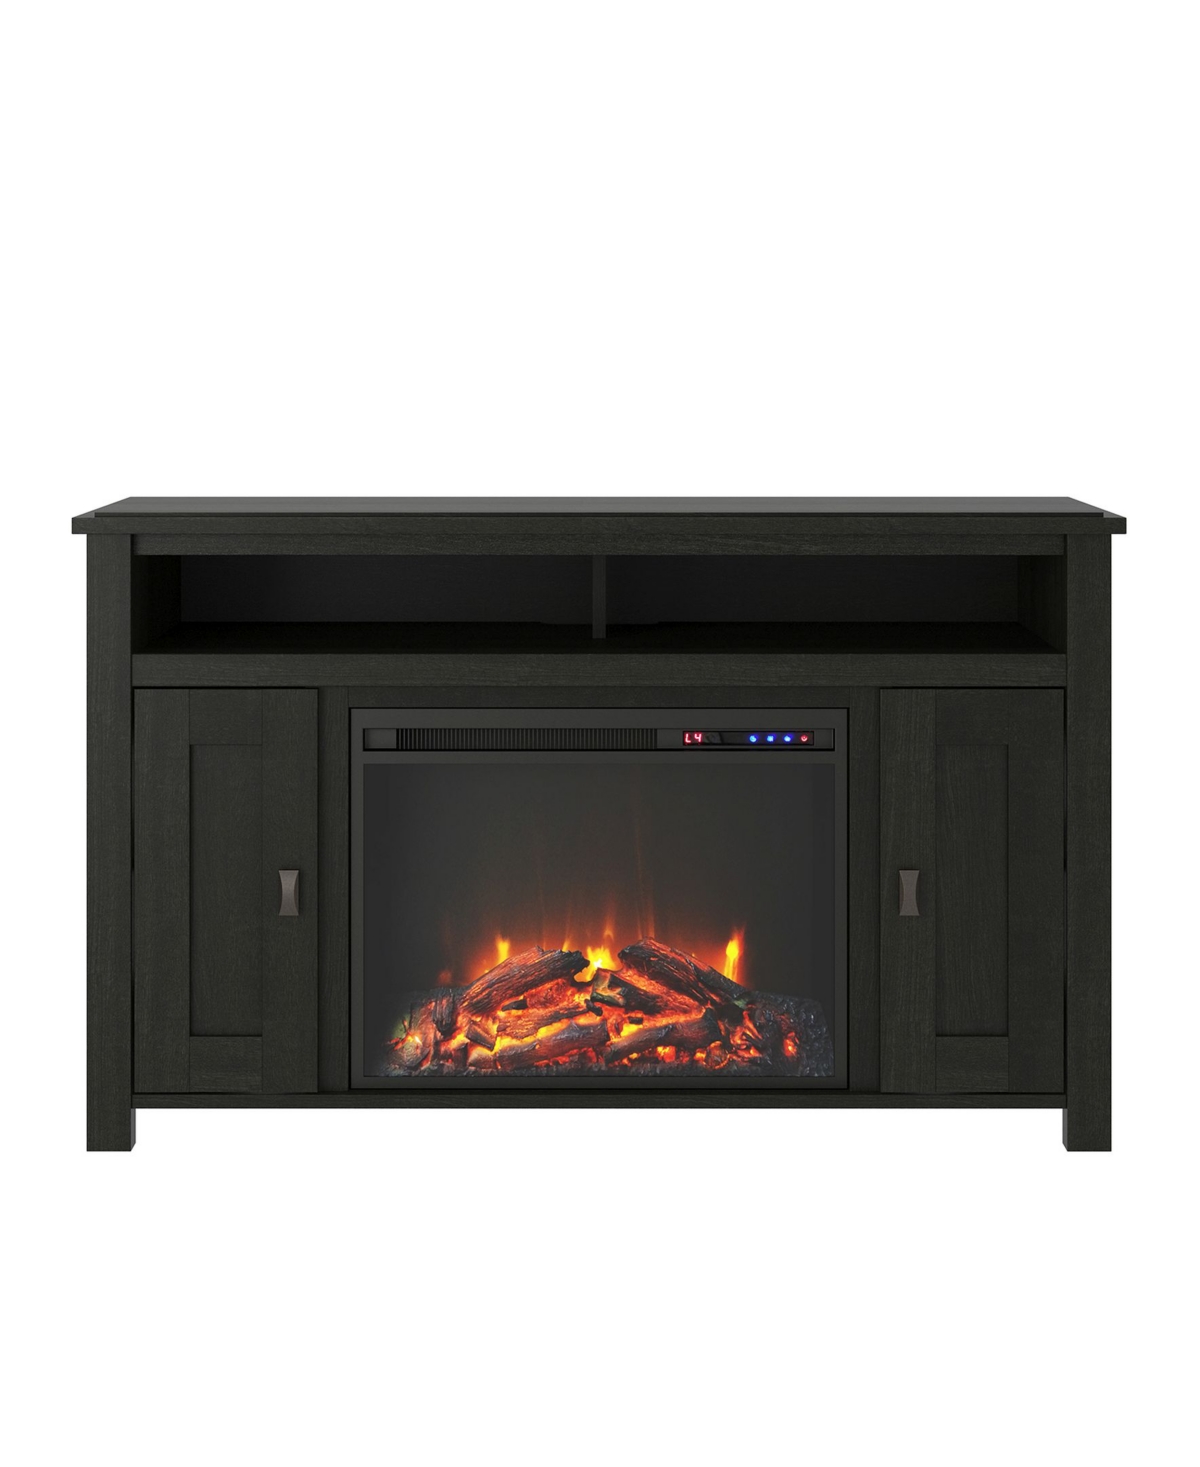 10461345 Ameriwood Home Winthrop Electric Fireplace Tv Cons sku 10461345